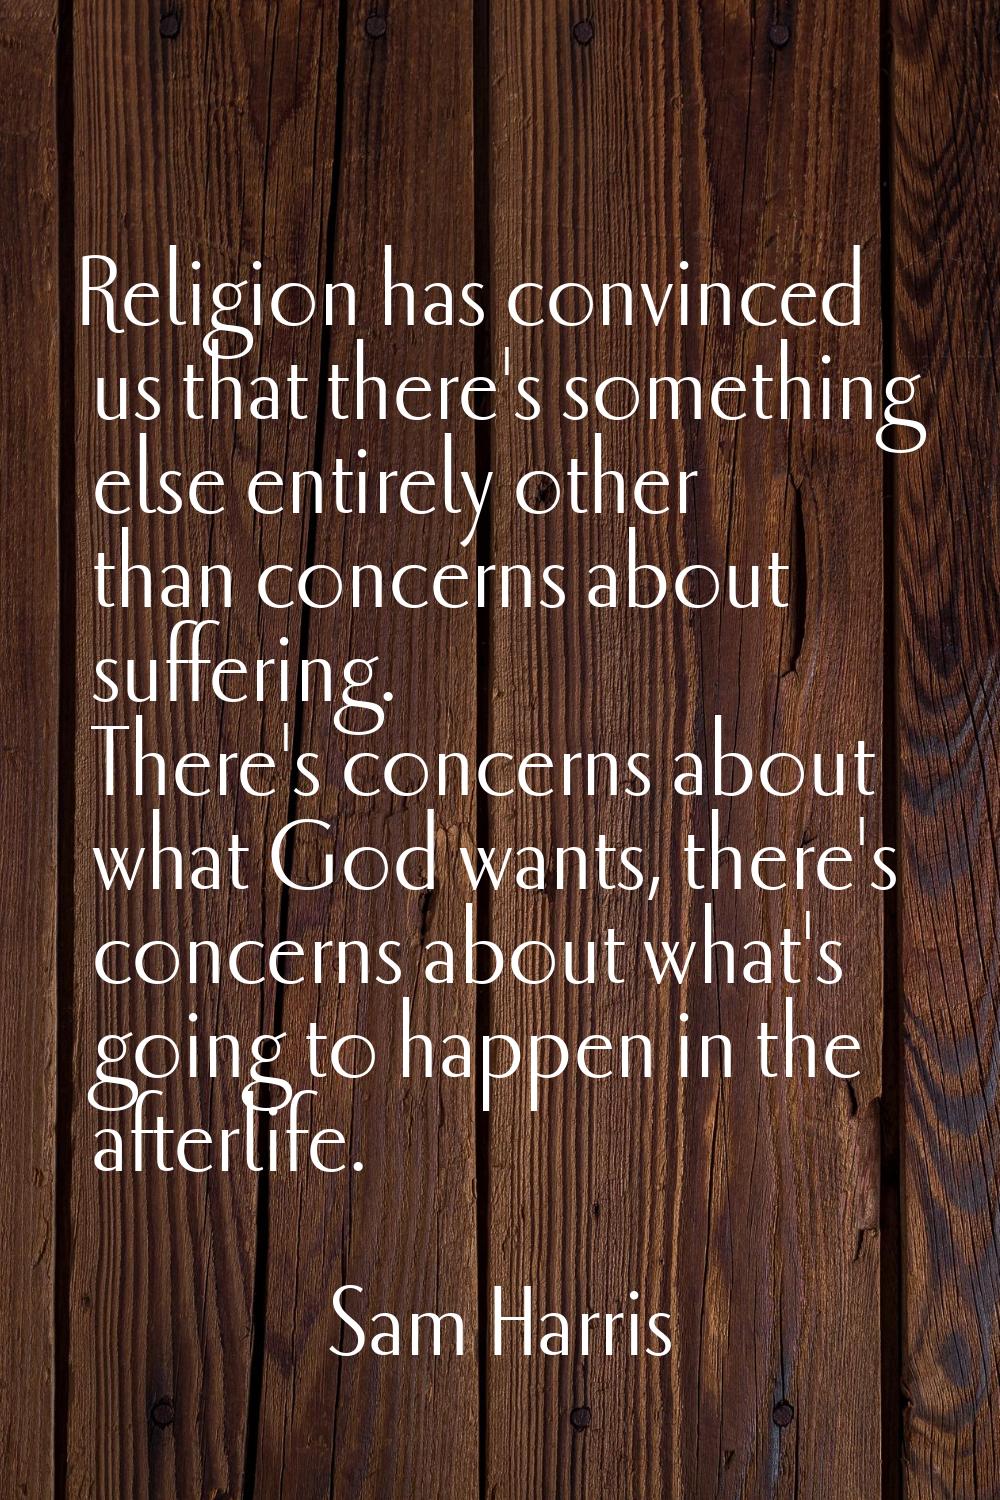 Religion has convinced us that there's something else entirely other than concerns about suffering.